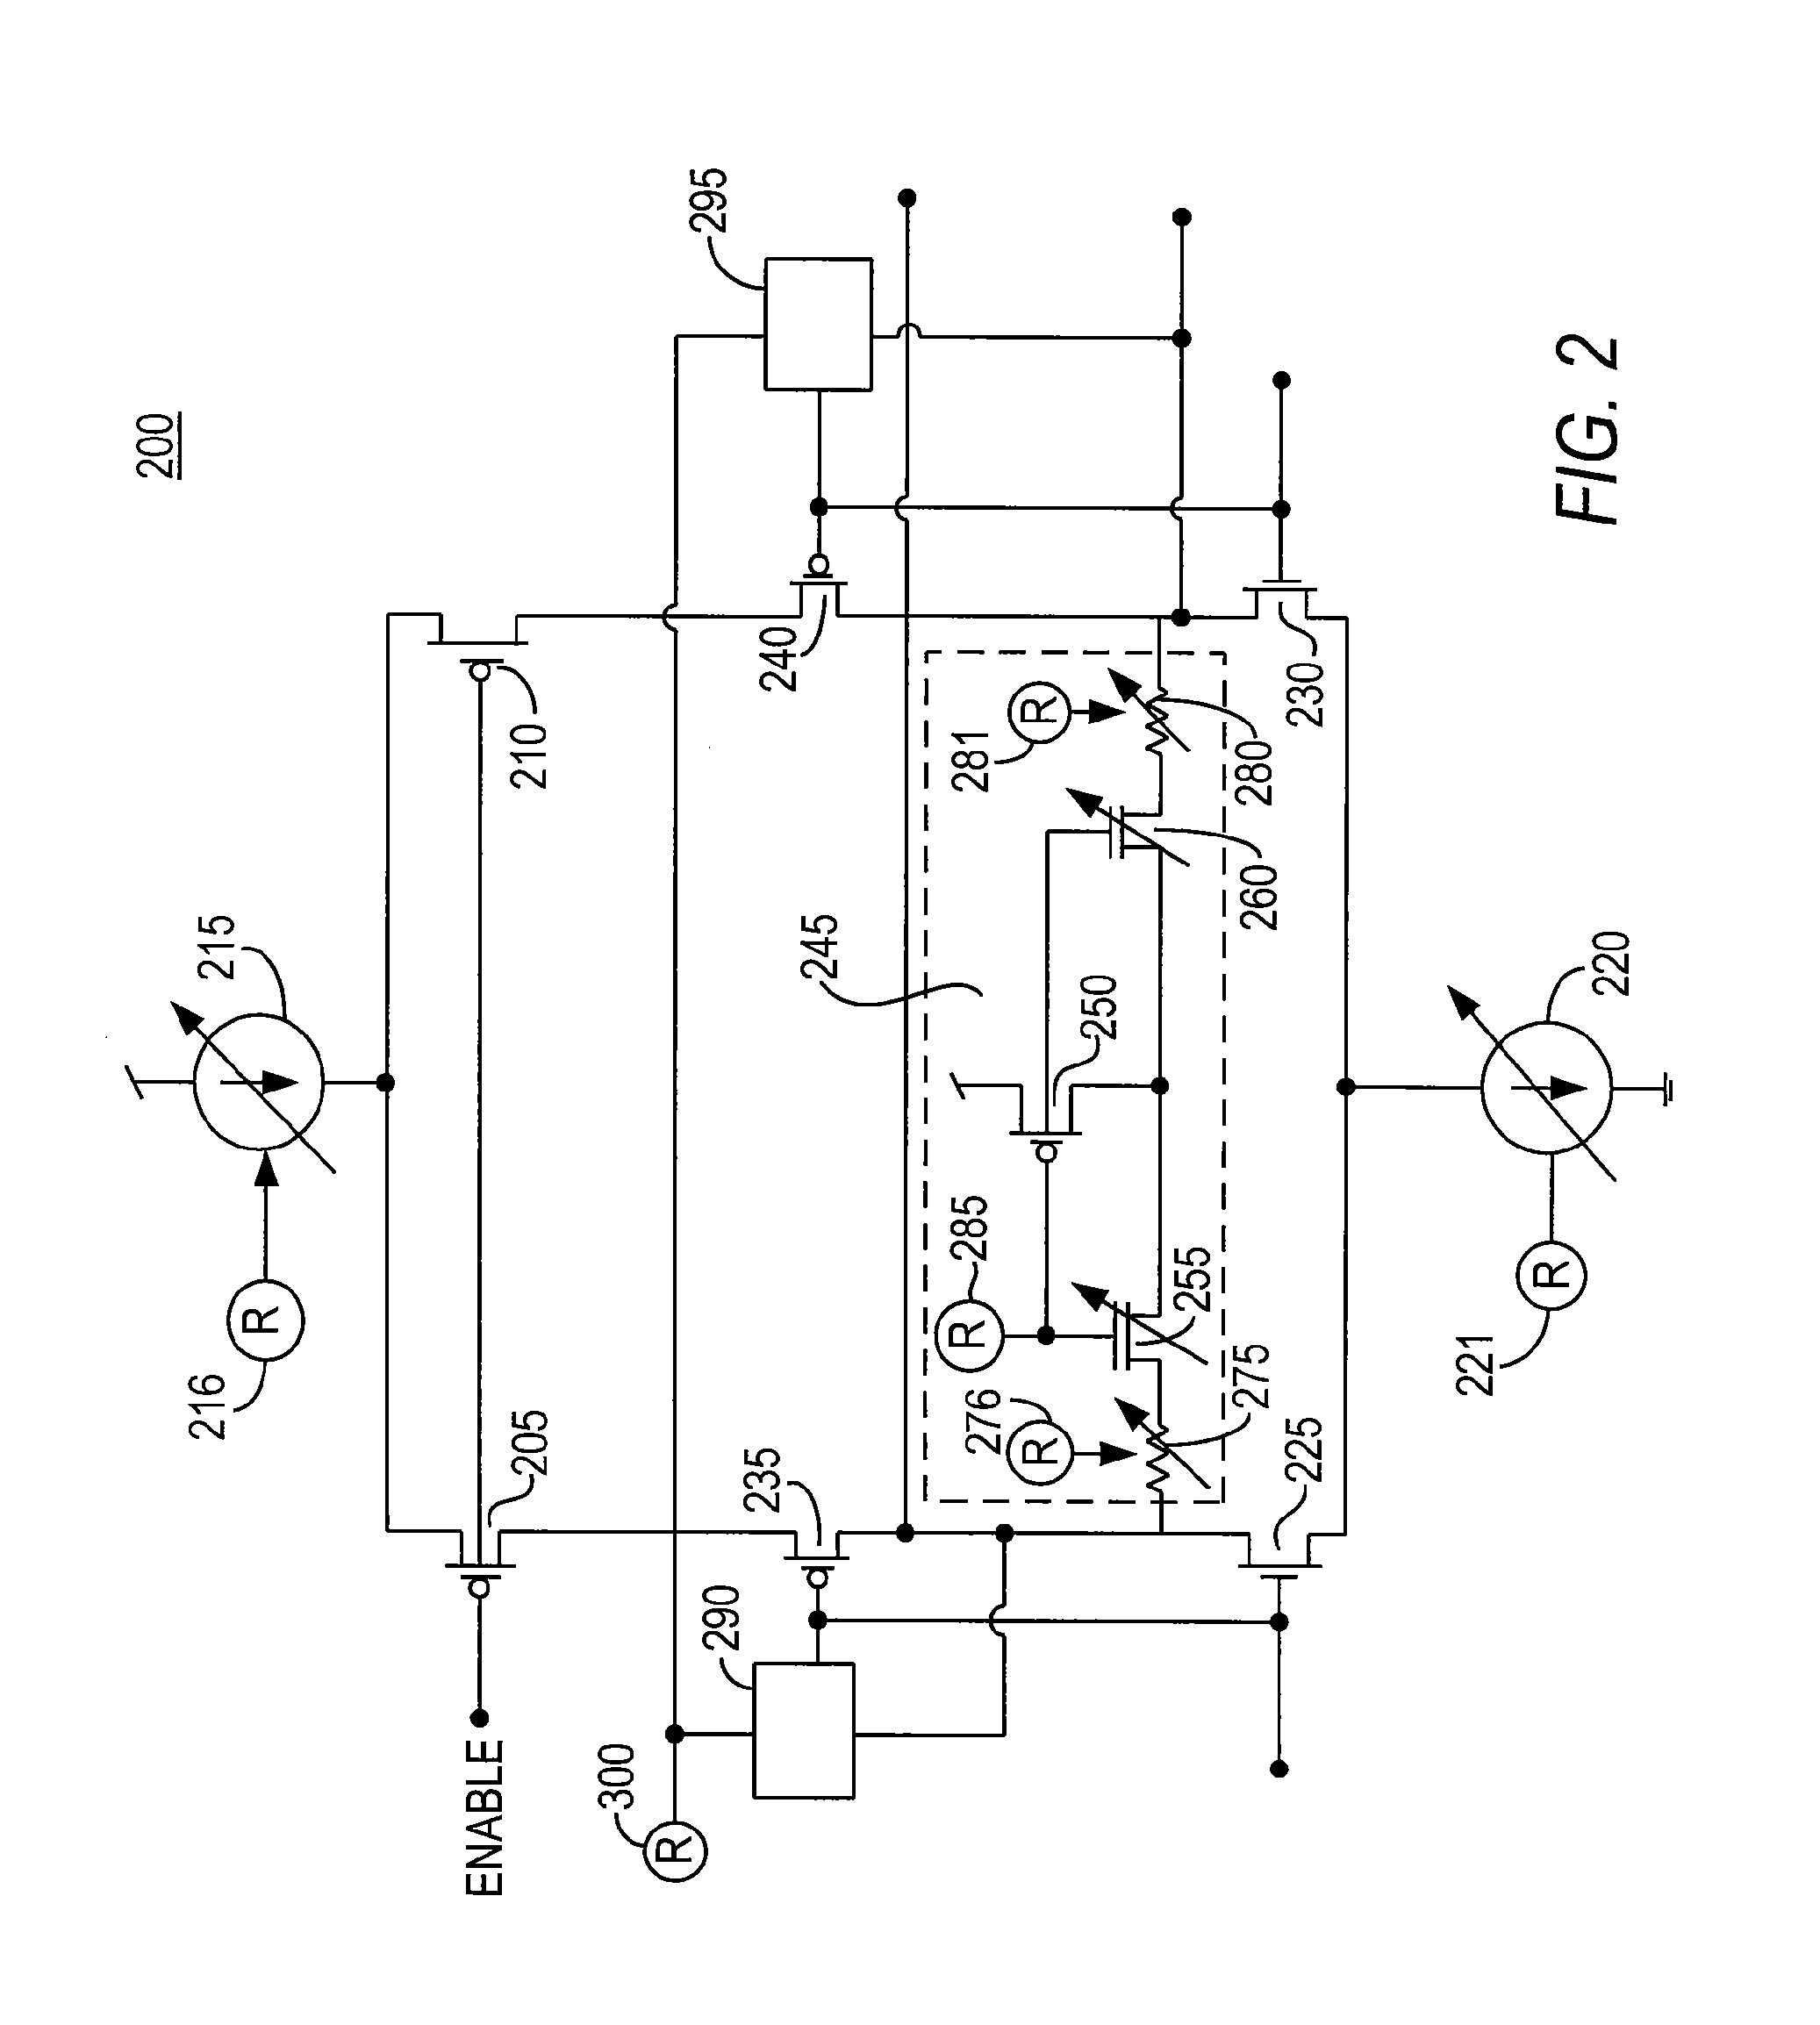 Programmable low-voltage differential signaling output driver